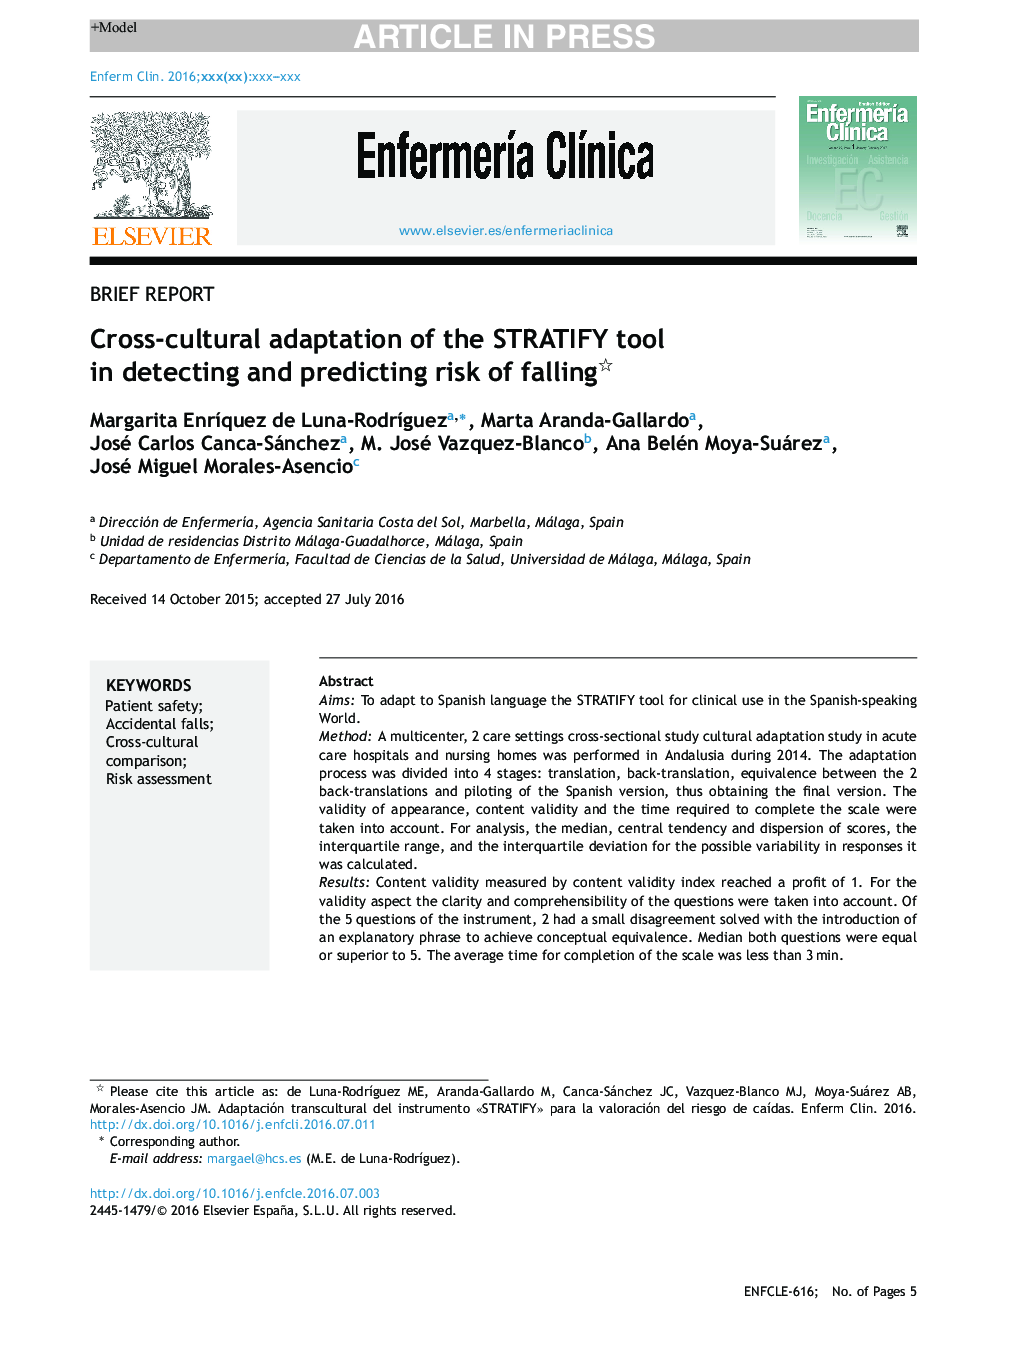 Cross-cultural adaptation of the STRATIFY tool in detecting and predicting risk of falling